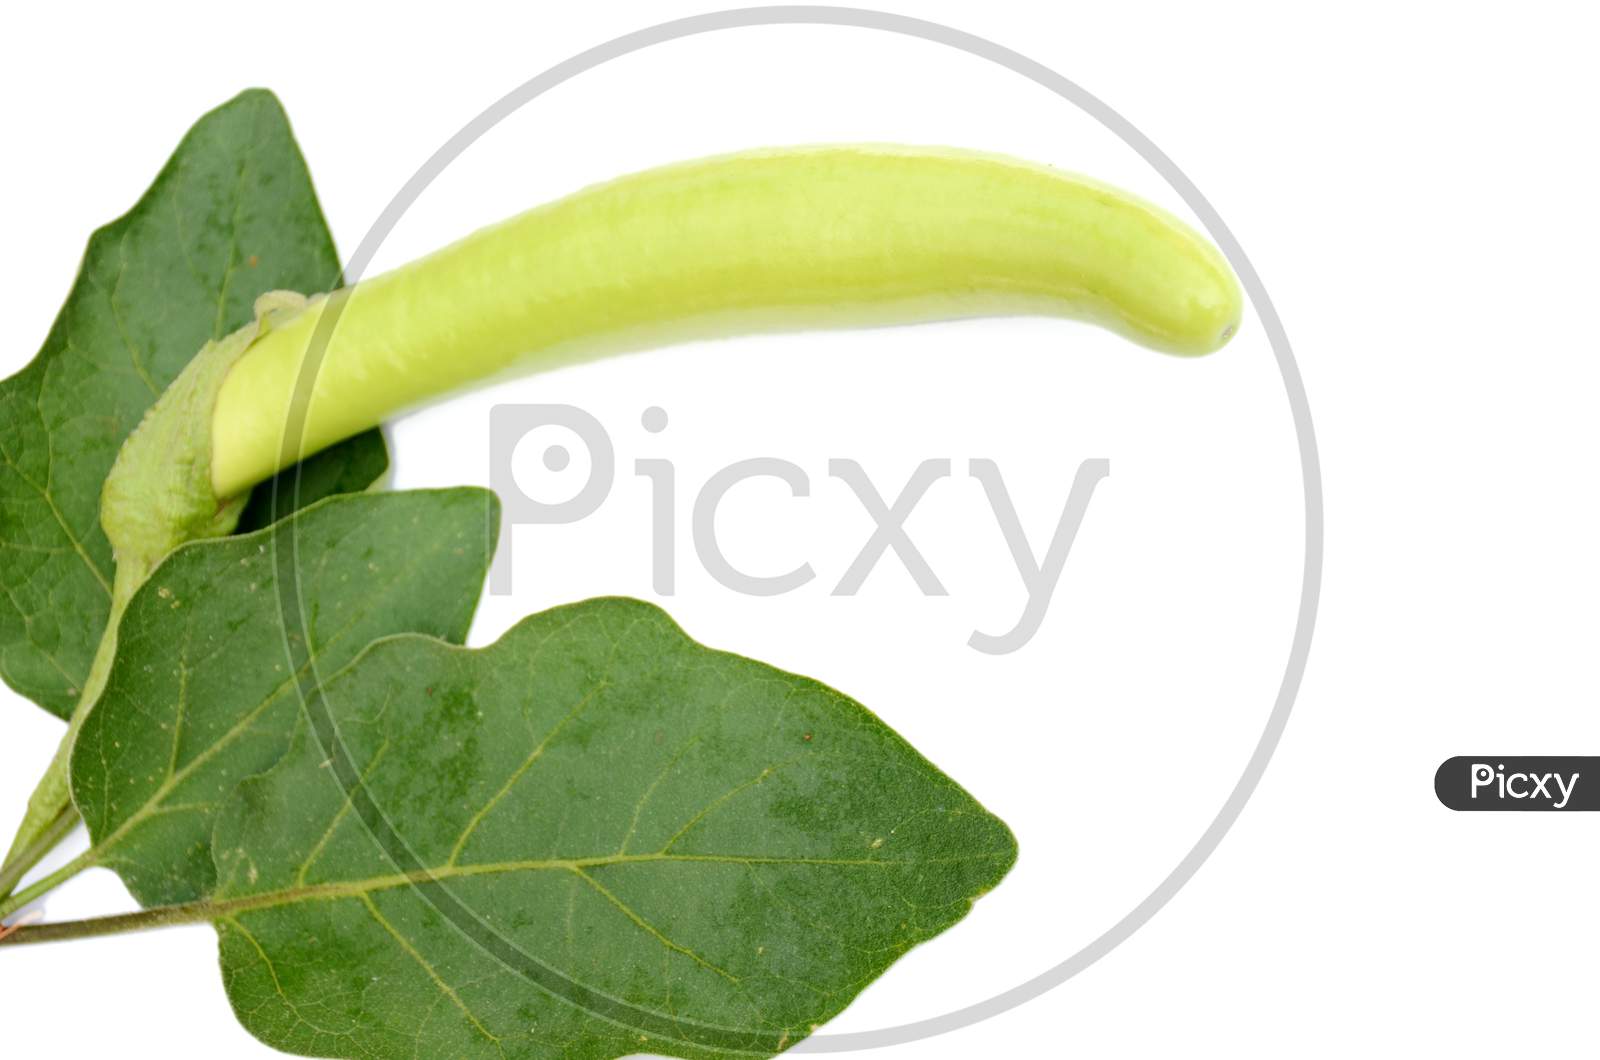 the  brinjal with green leaves isolated on white background.